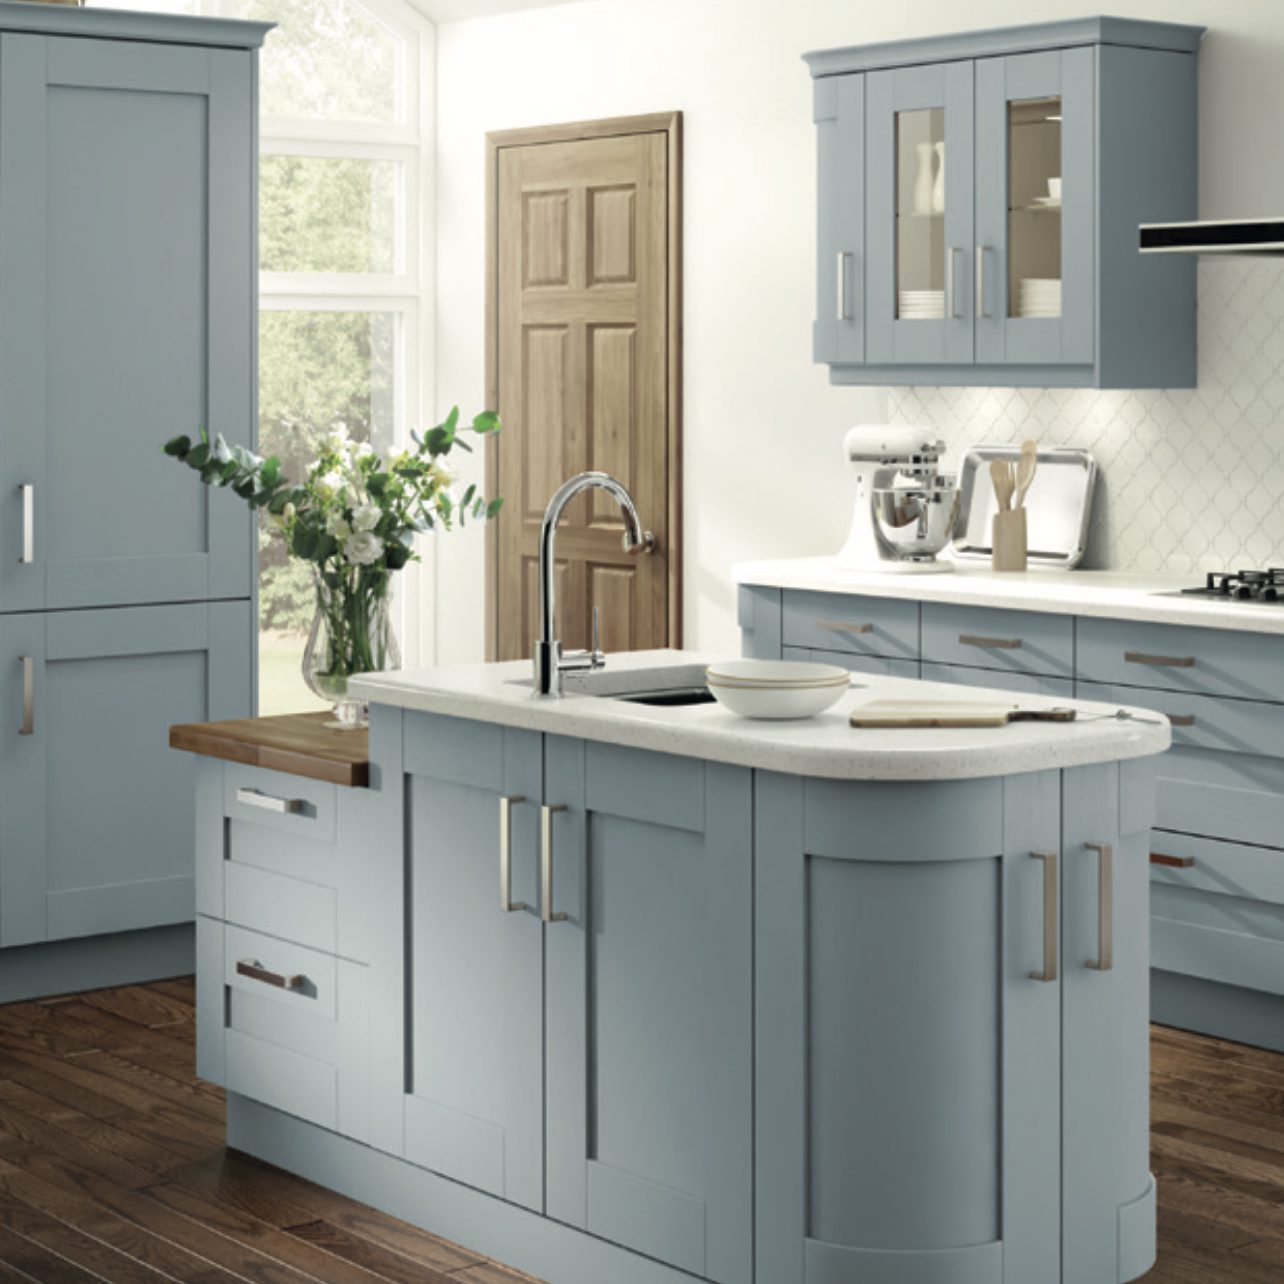 Painted shaker kitchen in soft blue